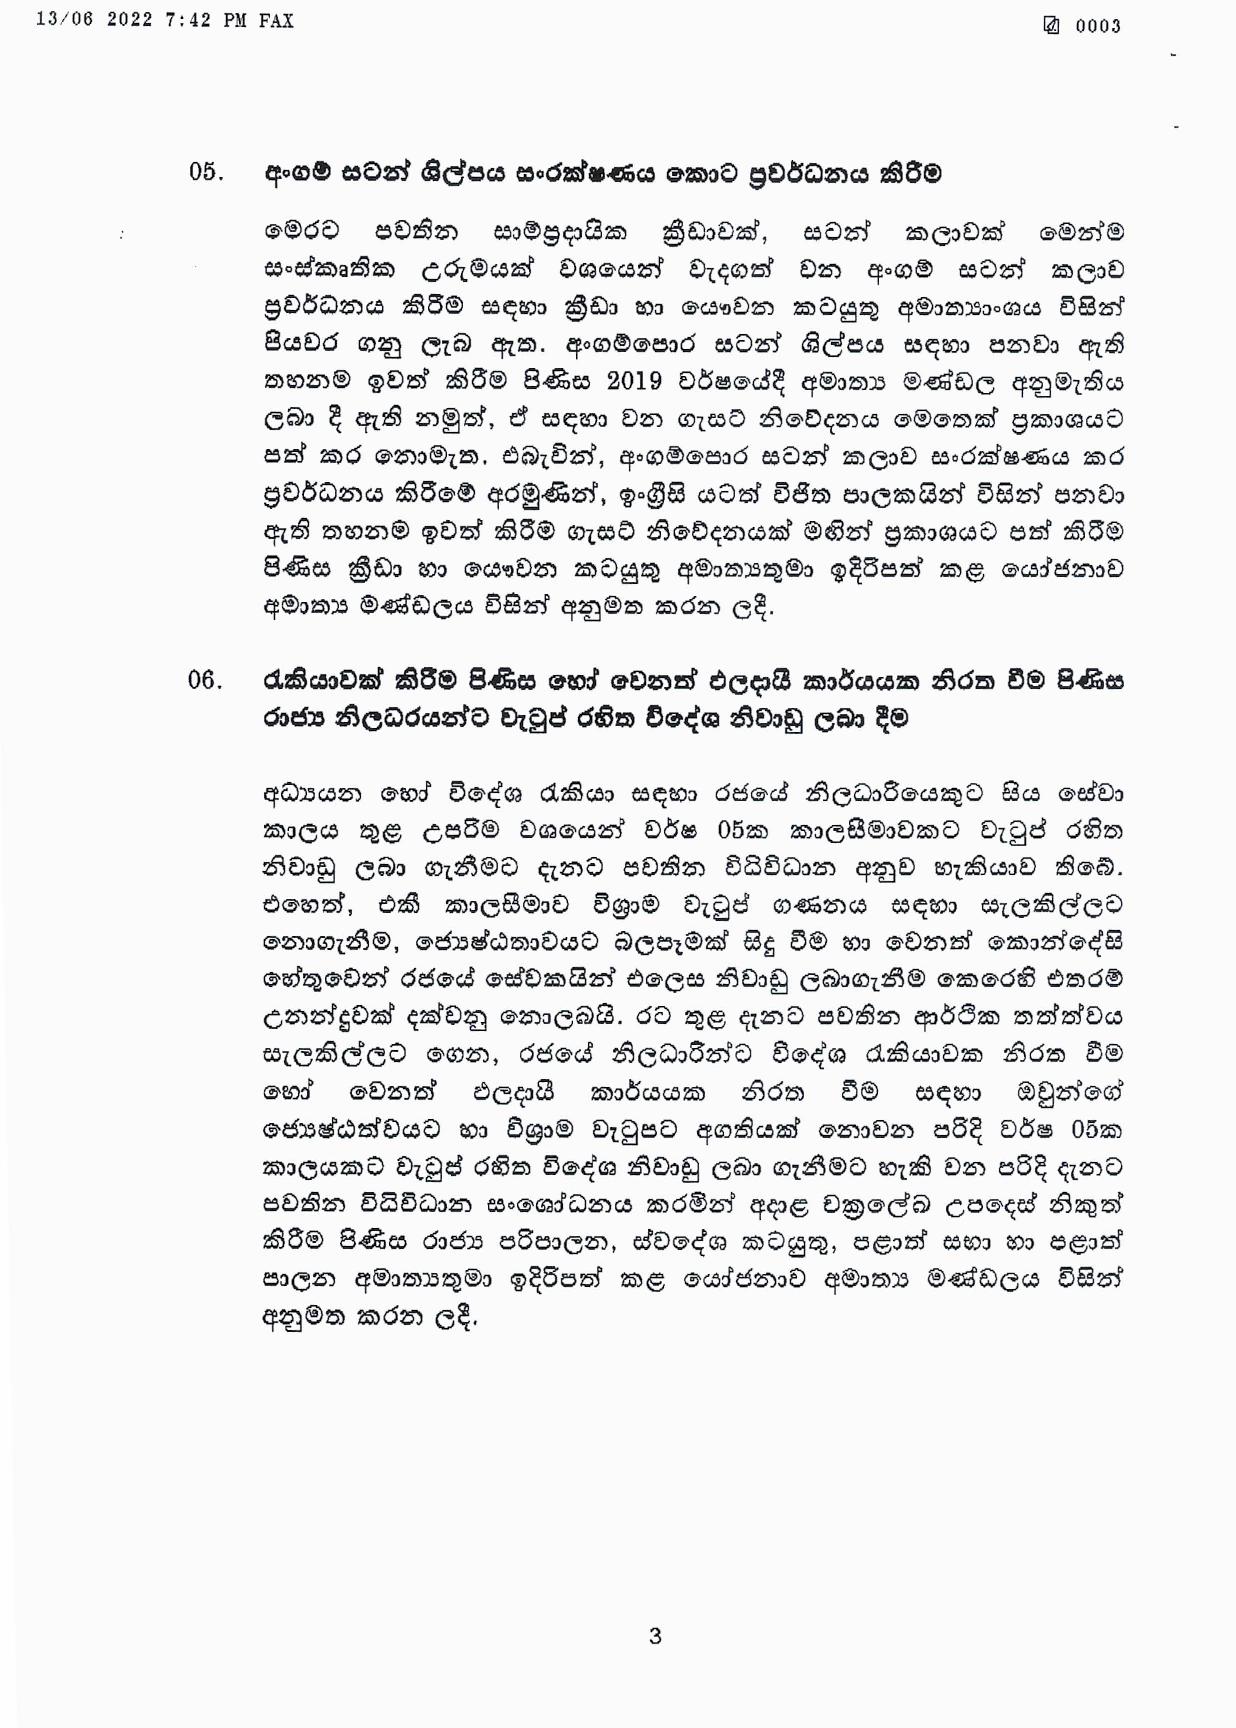 Cabinet Decision on 13.06.2022 page 003